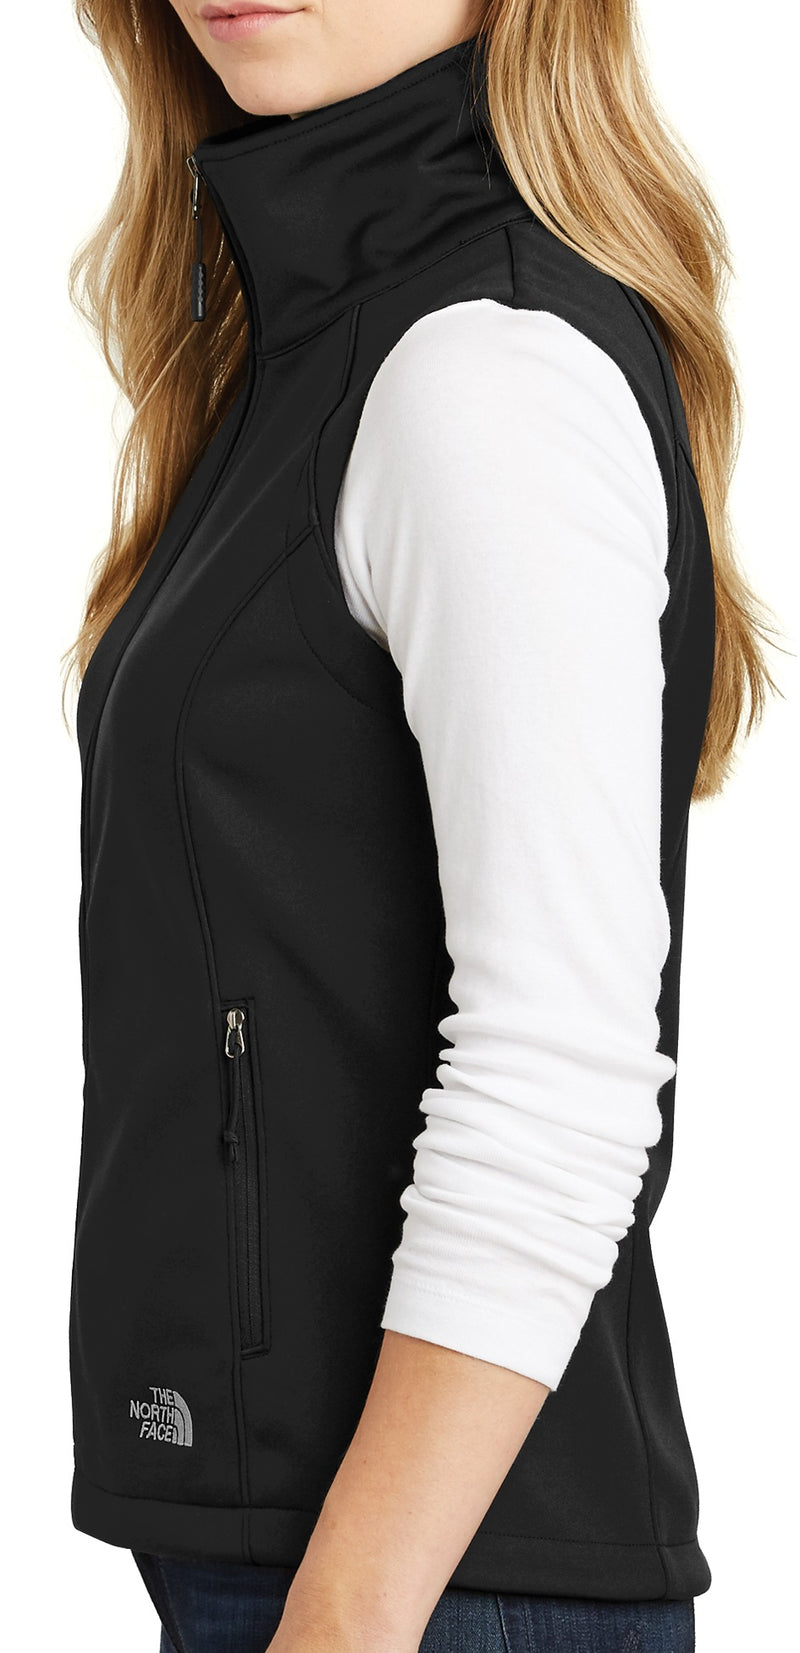 The North Face [NF0A3LH1] Ladies Ridgewall Soft Shell Vest. Live Chat For Bulk Discounts.